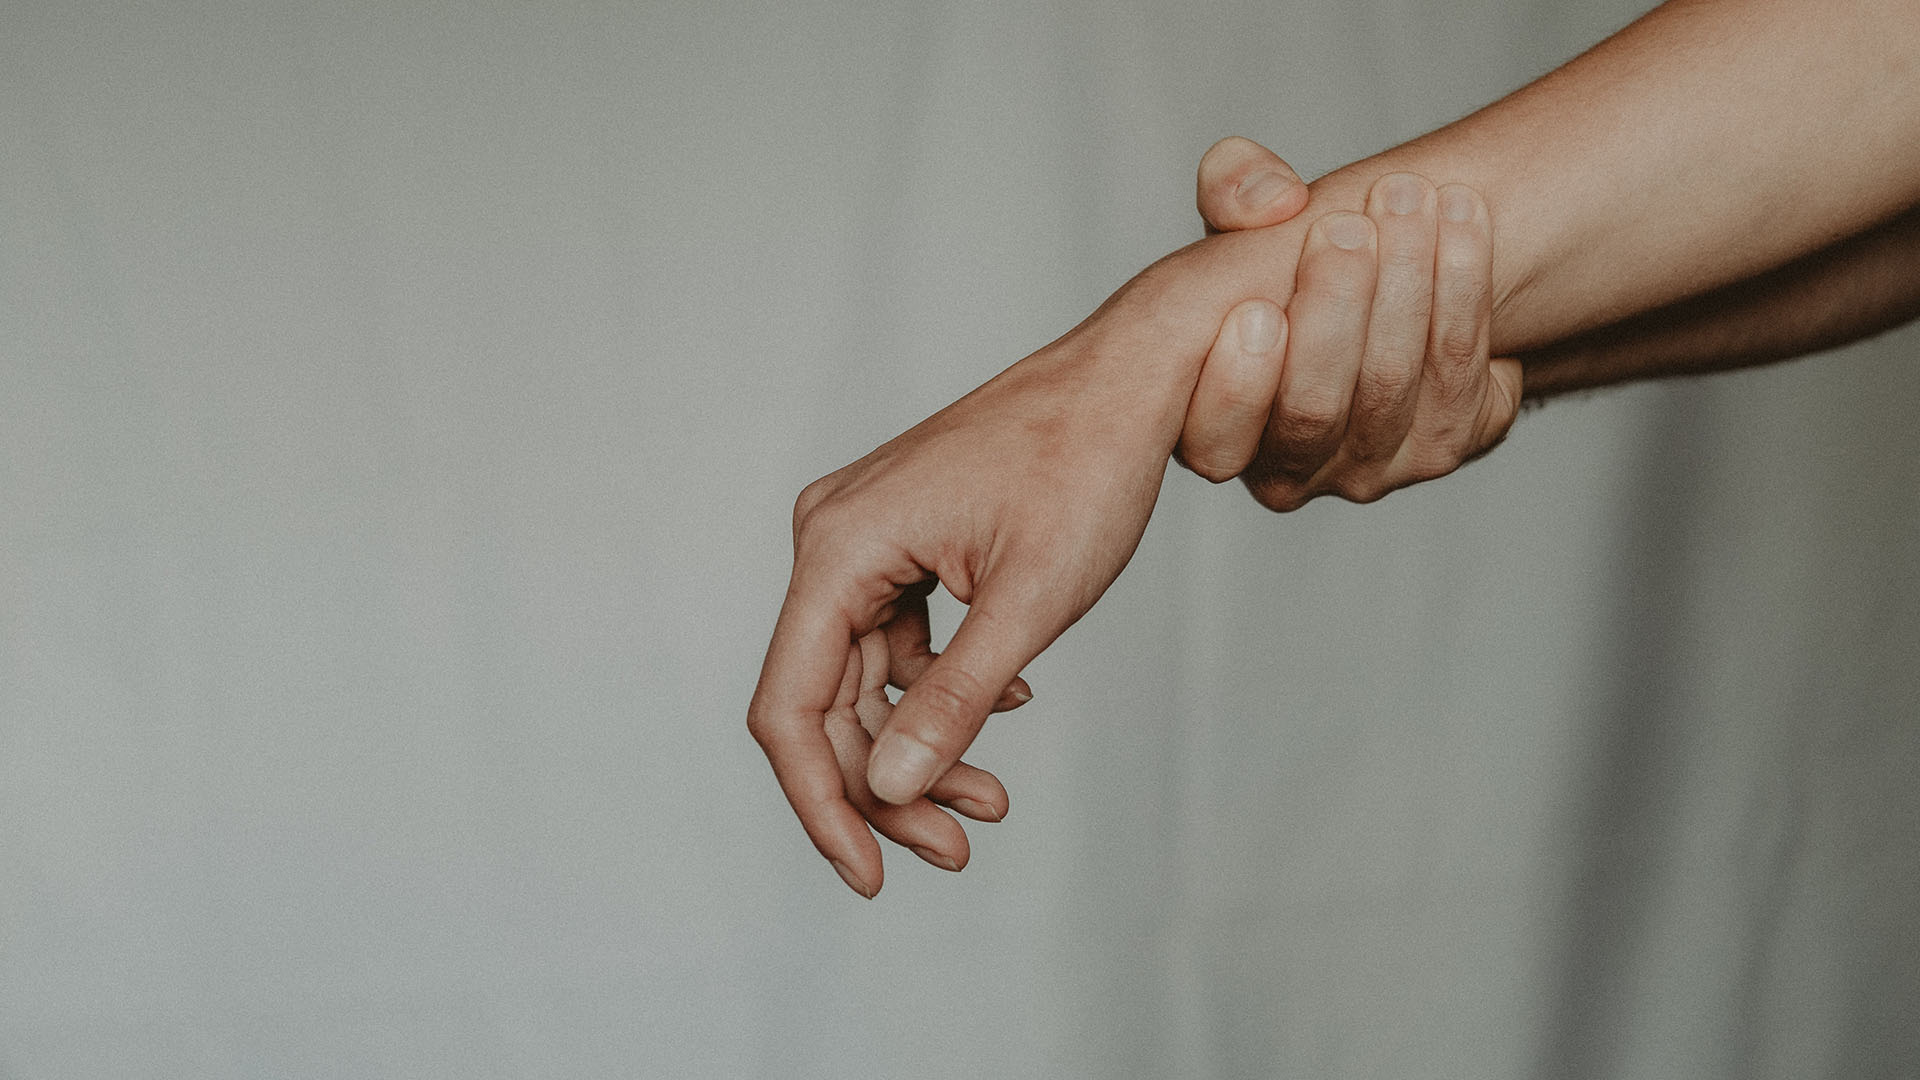 A person's hand holding another person's hand.